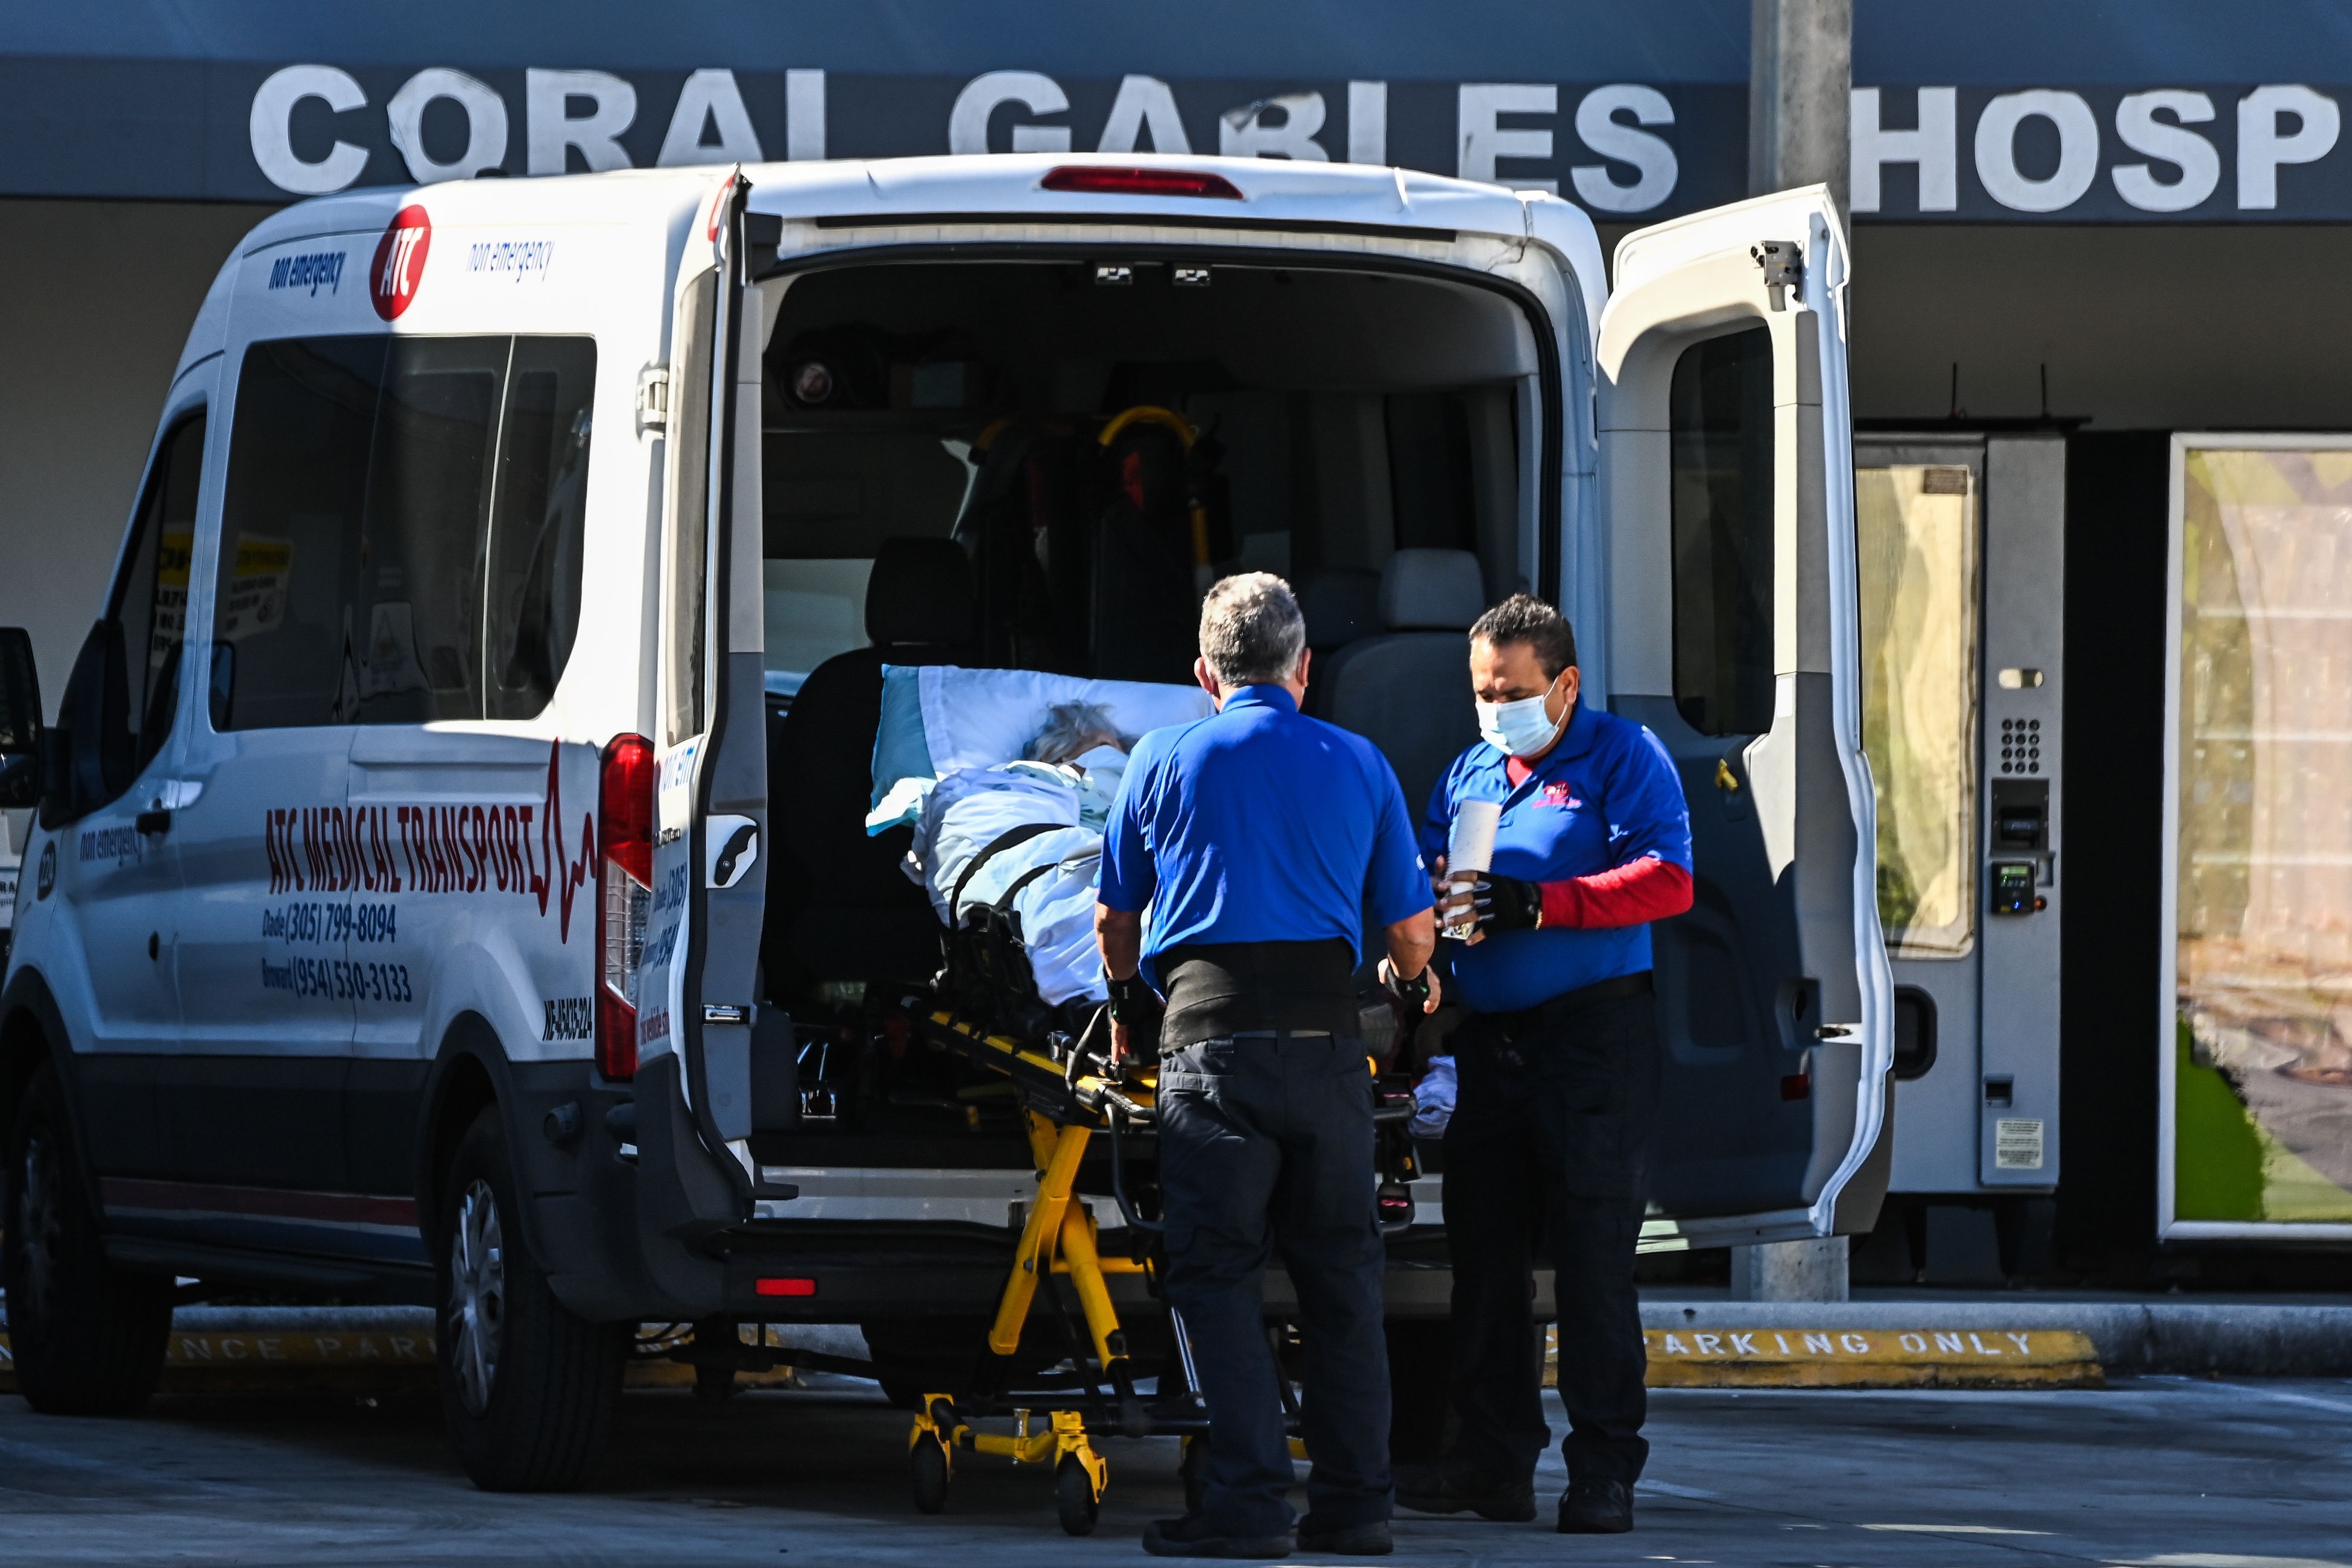 Medics transfer a patient on a stretcher from an ambulance outside of Emergency at Coral Gables Hospital where Coronavirus patients are treated in Coral Gables near Miami, Florida 